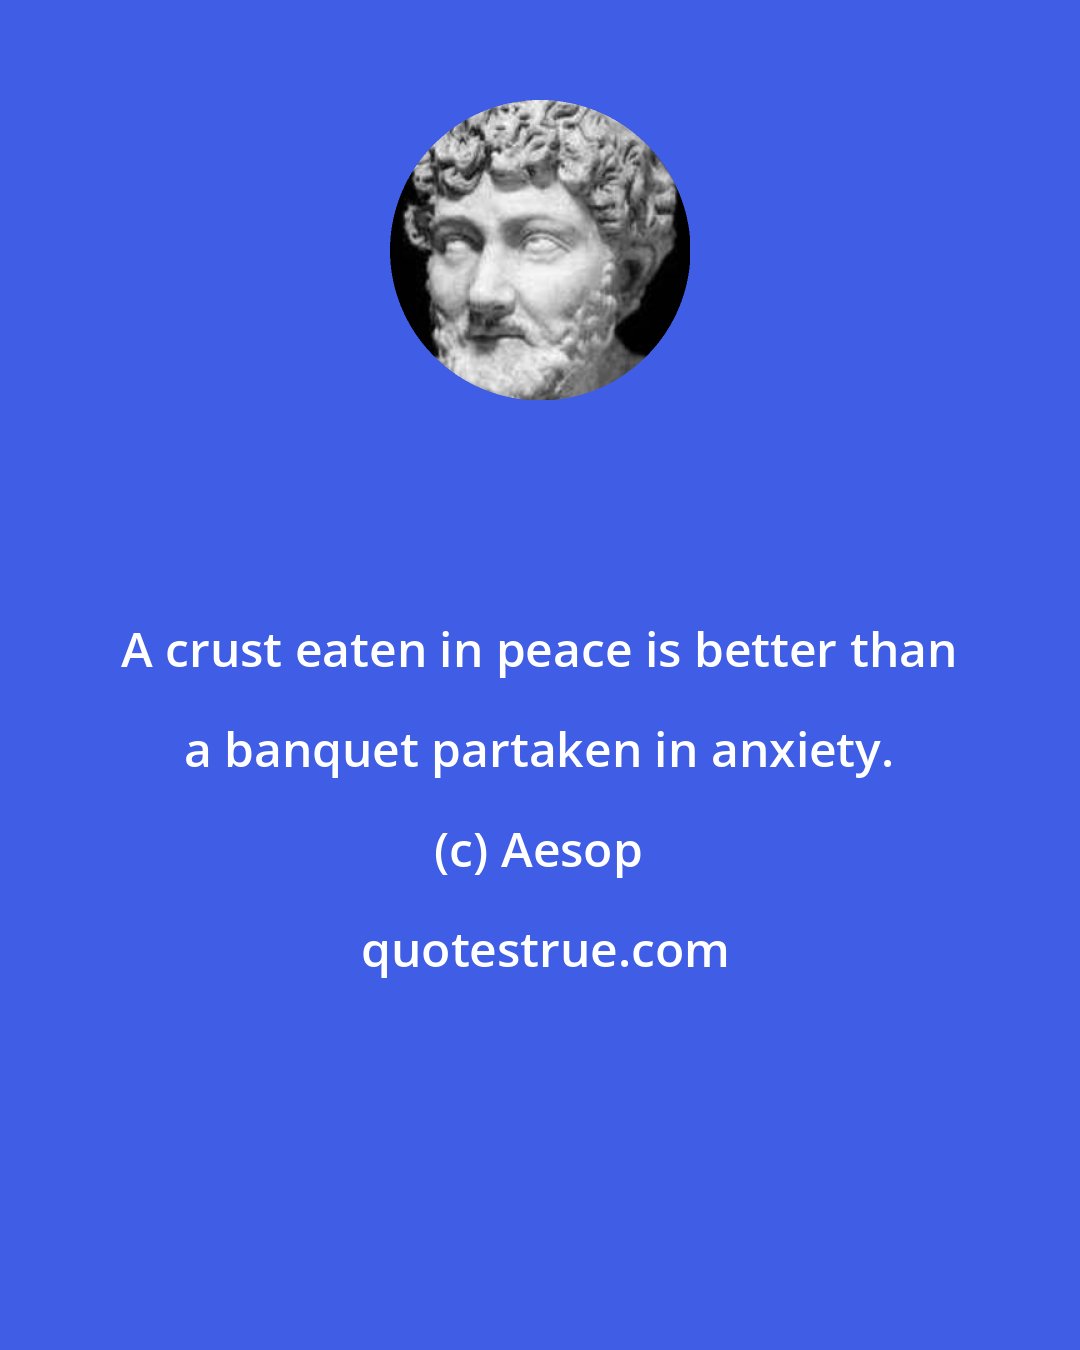 Aesop: A crust eaten in peace is better than a banquet partaken in anxiety.